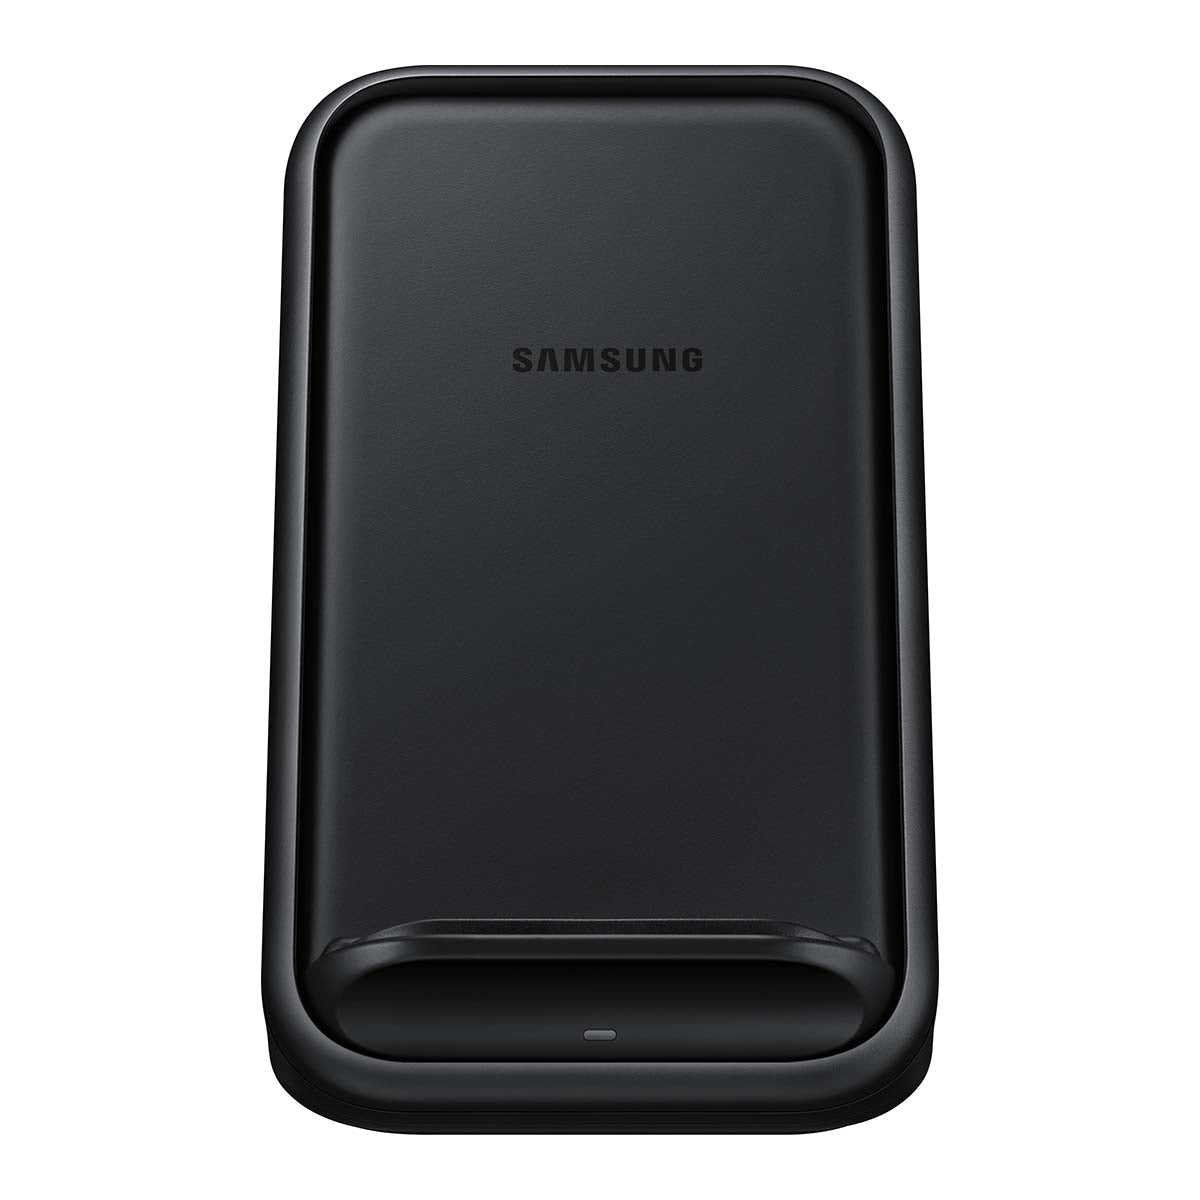 Samsung Fast Wireless Charge Stand 3.0 -  Black